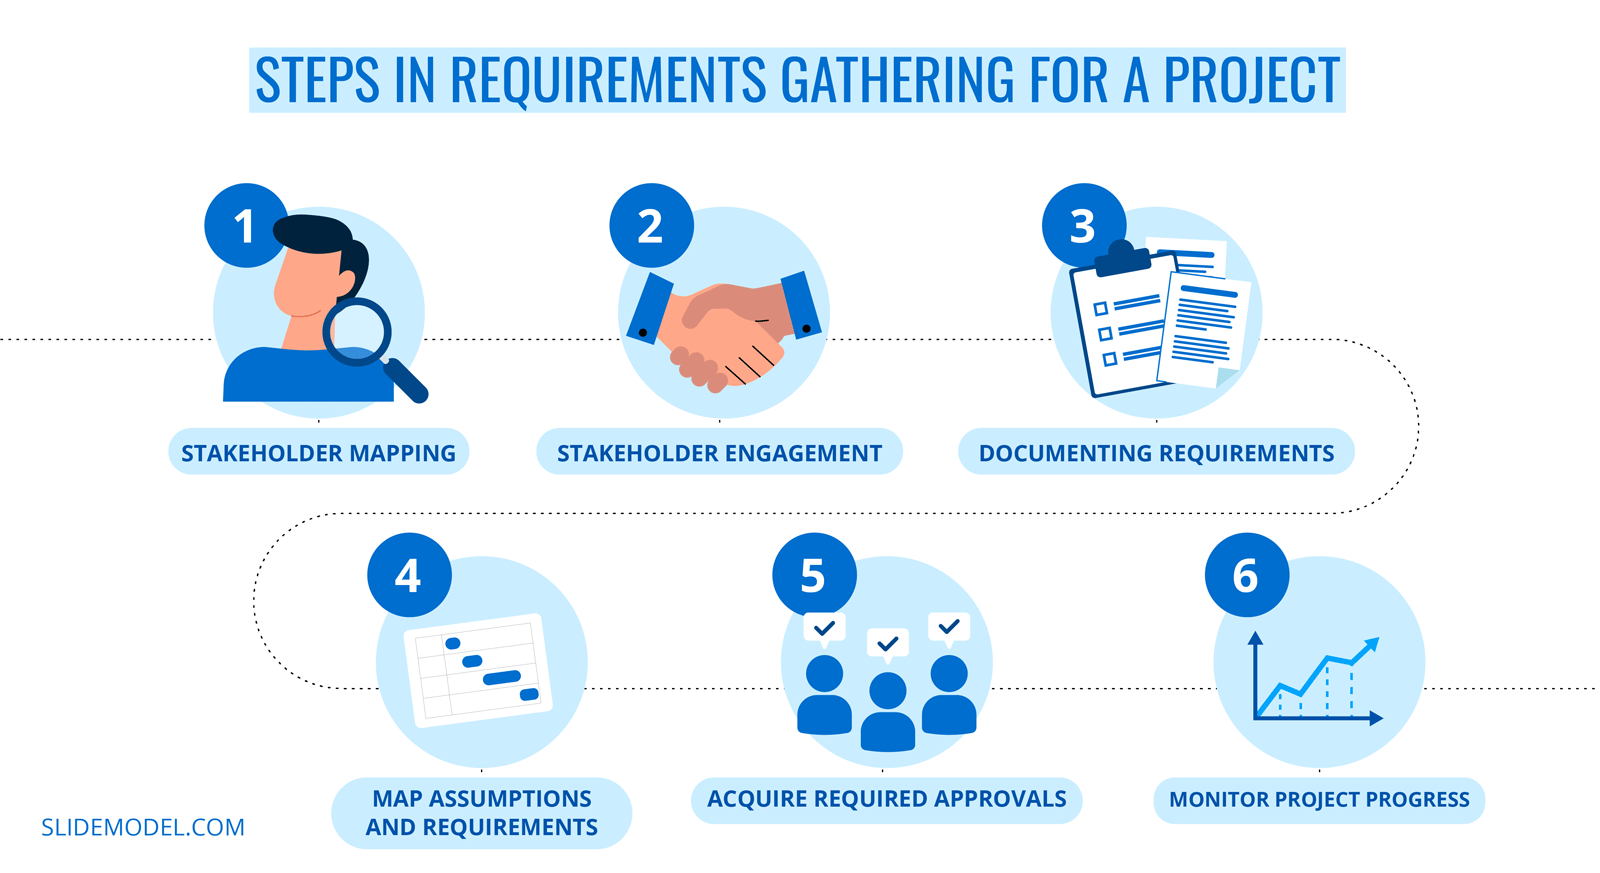 Steps in Requirements Gathering for a Project - Infographic by SlideModel